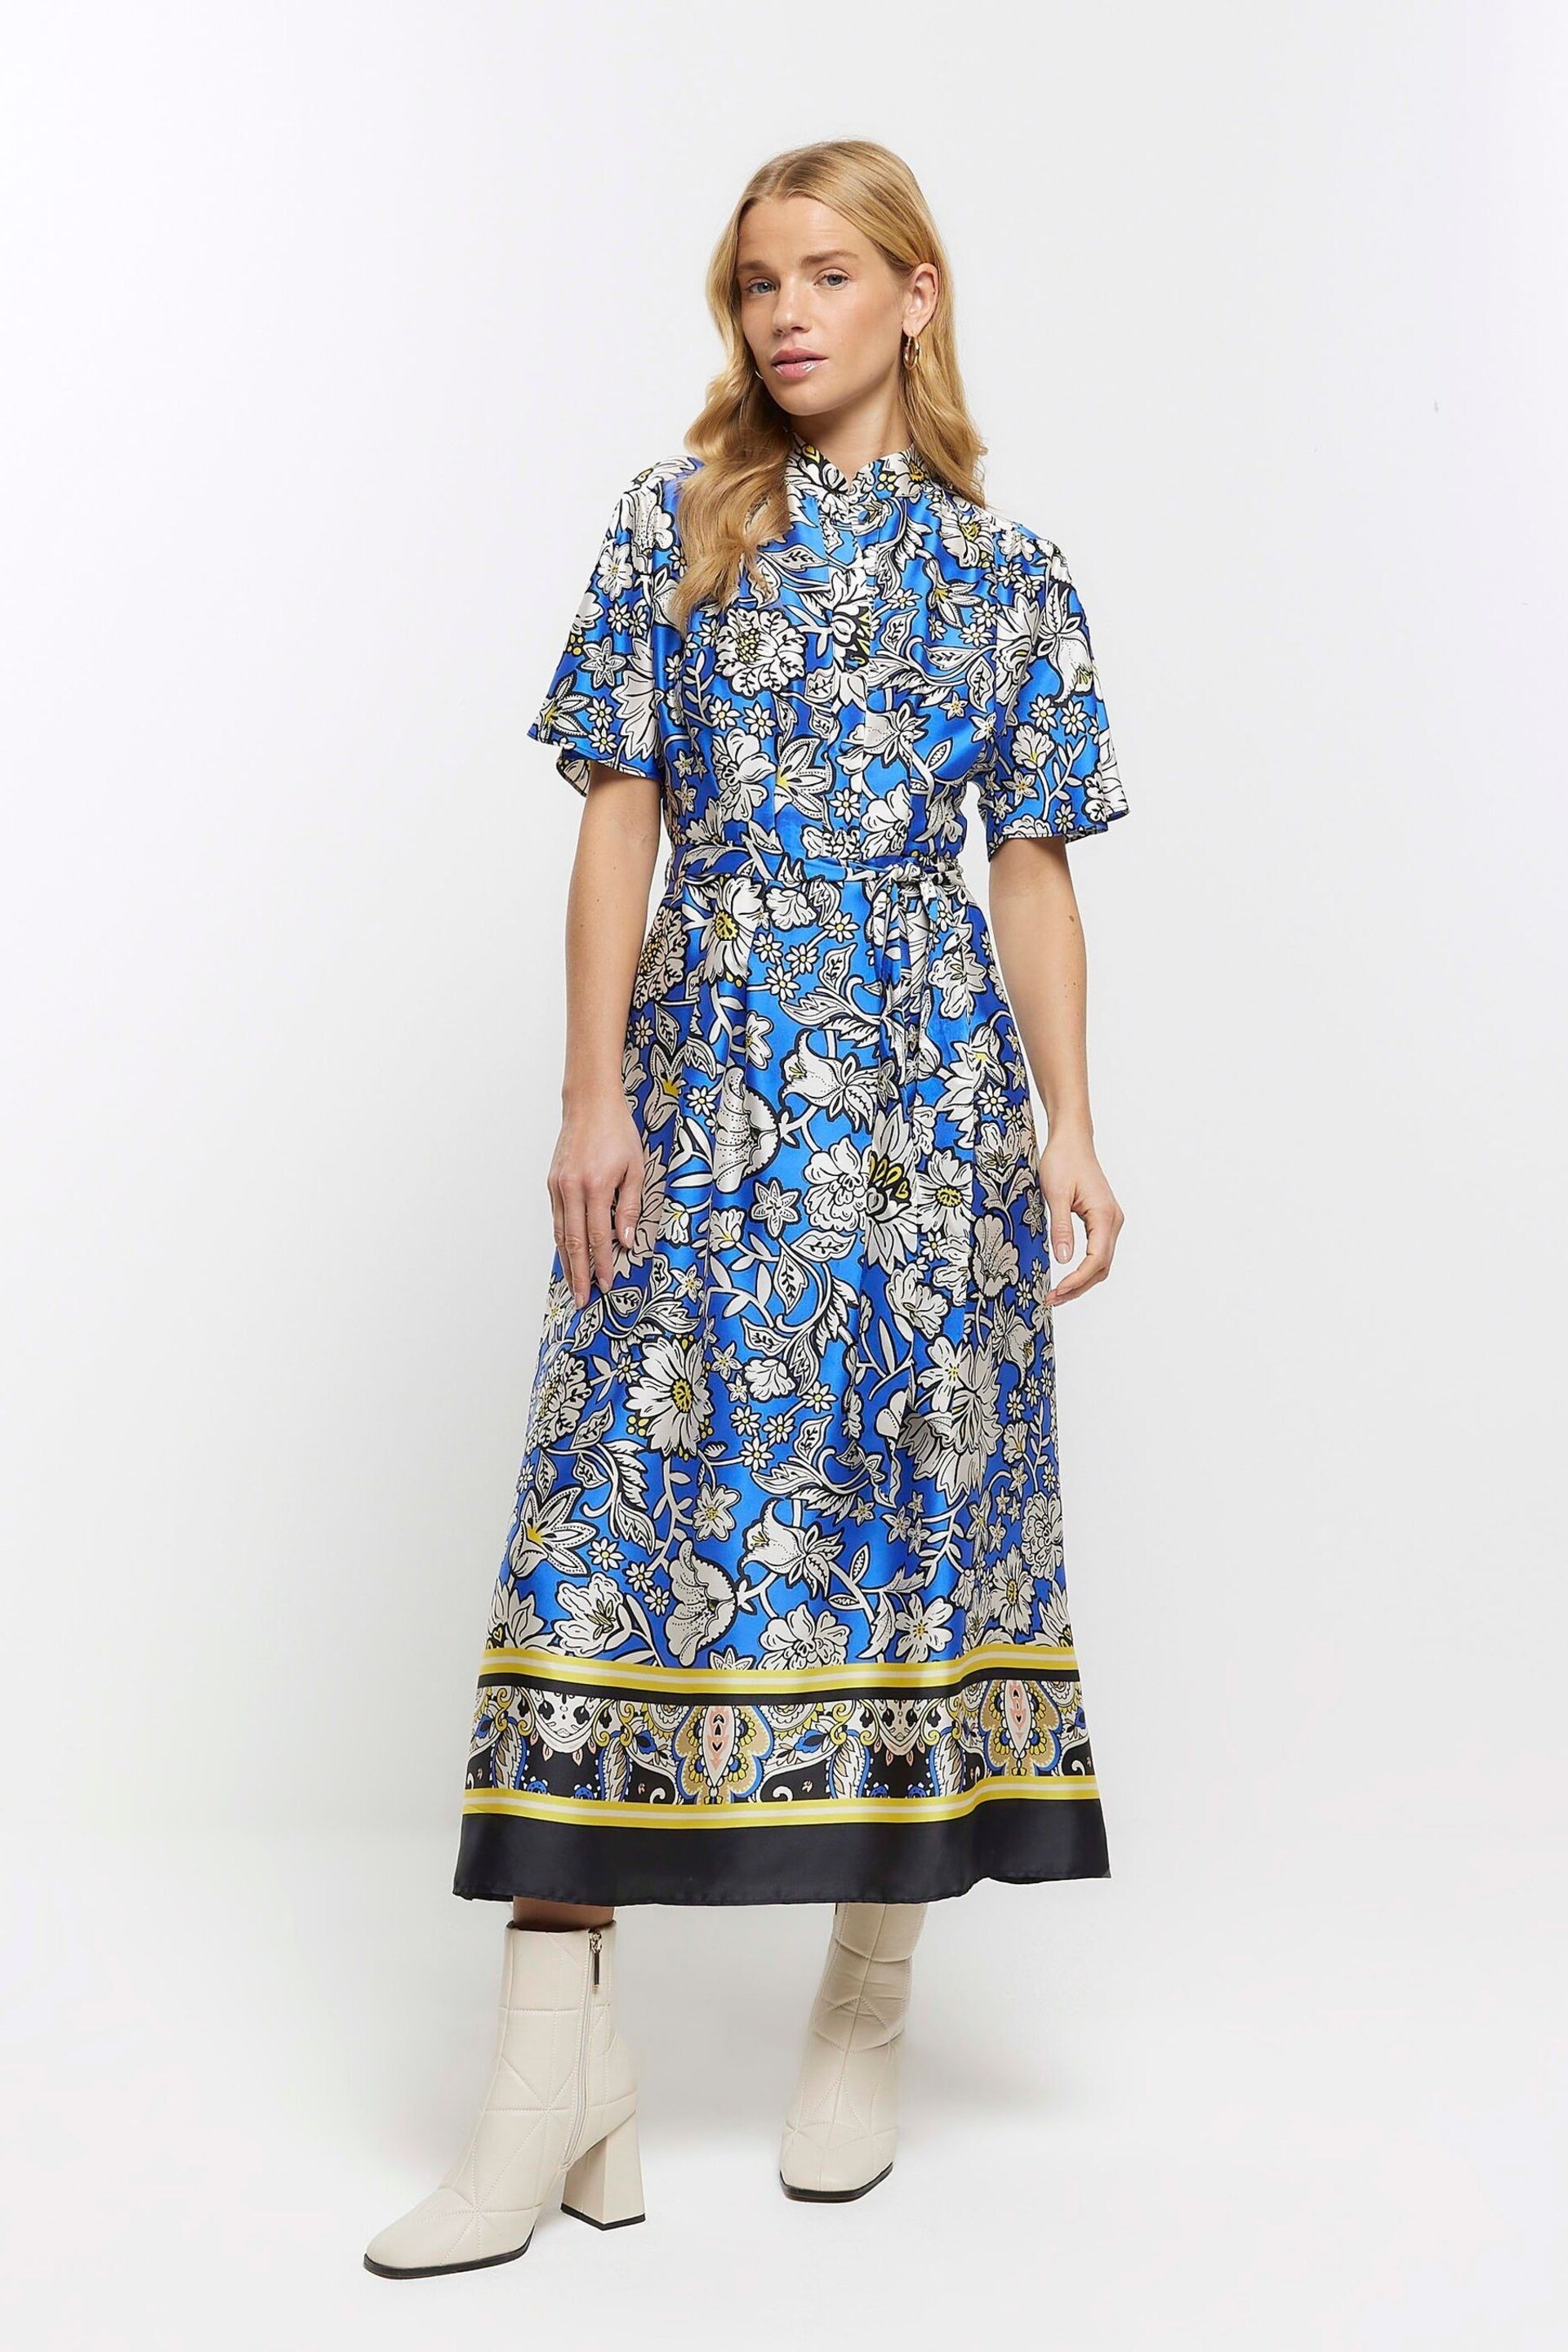 River Island Blue Printed Belted Button Shirt Dress - Image 1 of 6